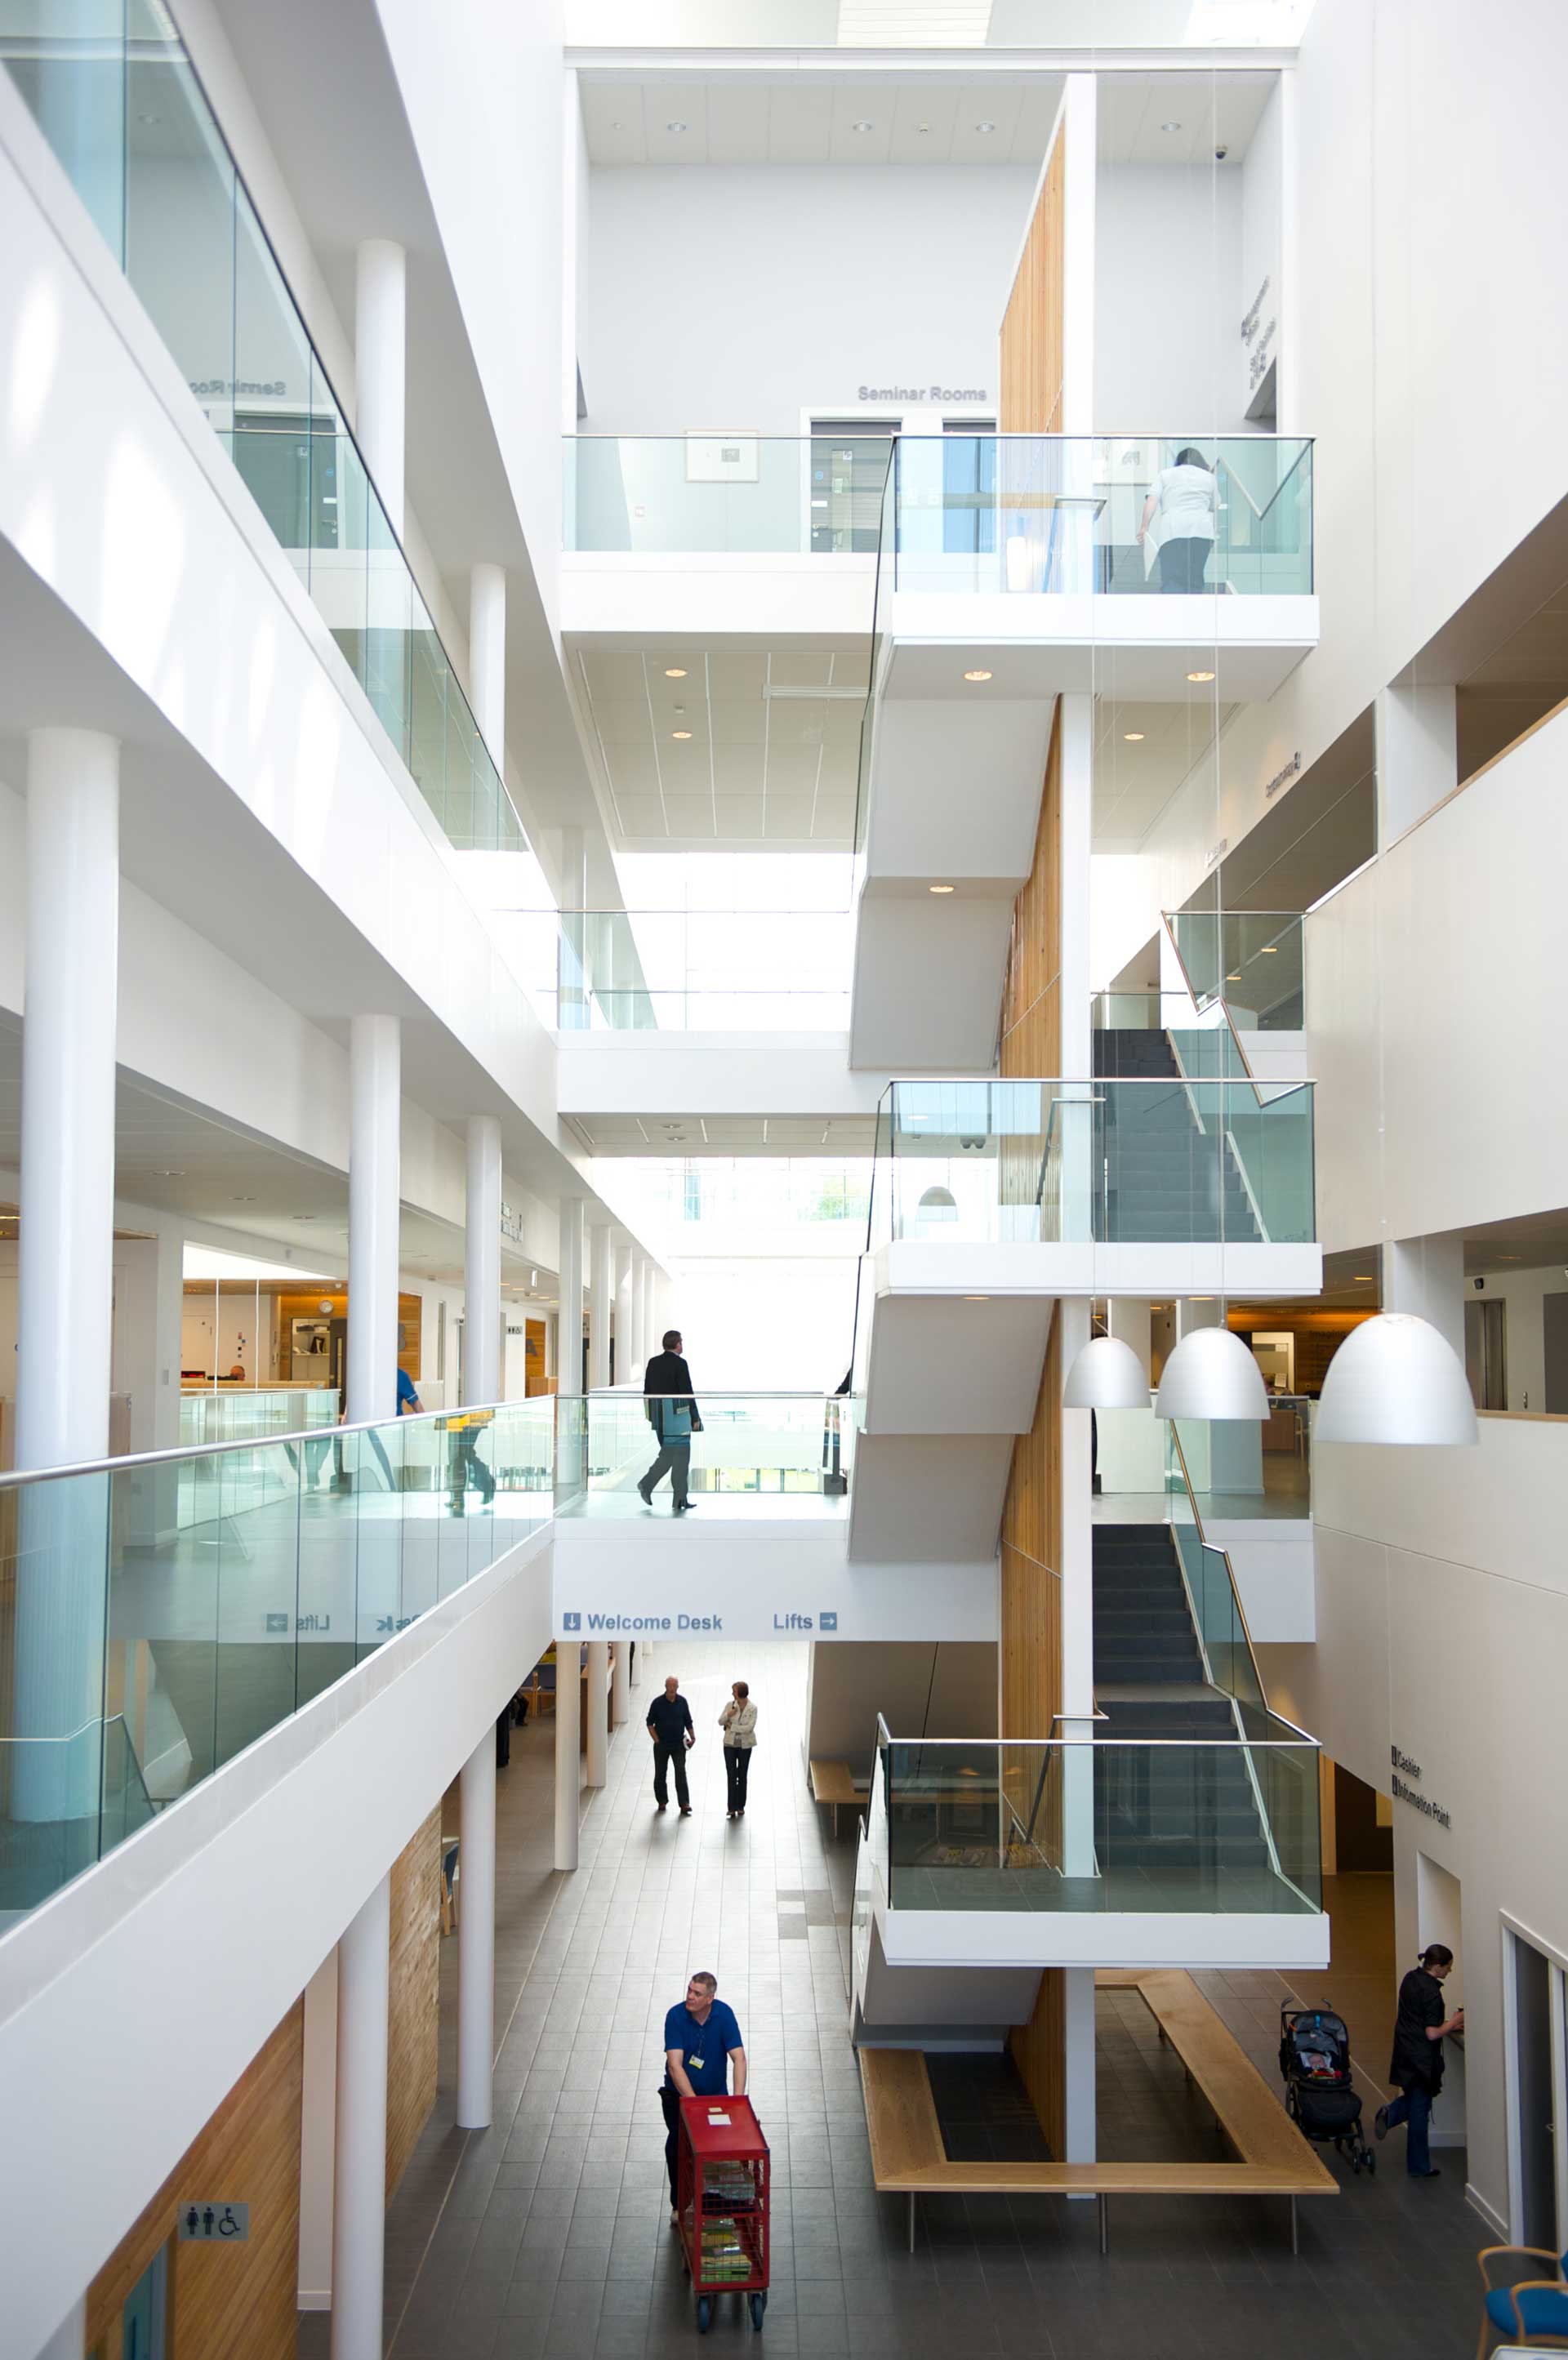 A photograph of a bright atrium space in a hospital where you can see people on several levels and walking stairs between the floors